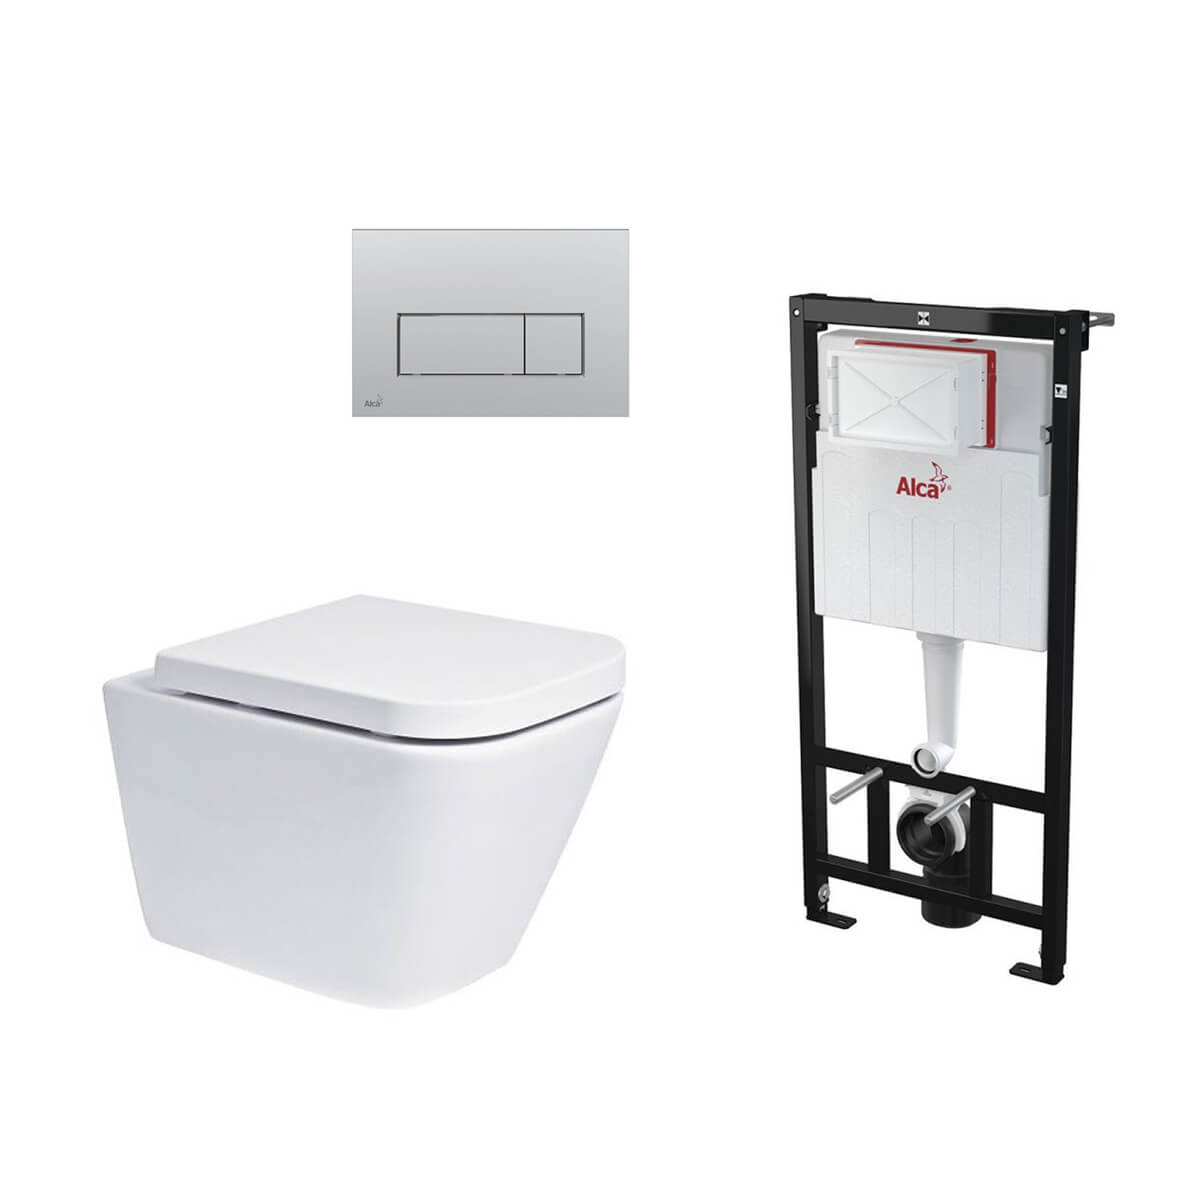 Linea Wall Hung Toilet & Alca 2 in 1 1.2m Frame Deal (11294)